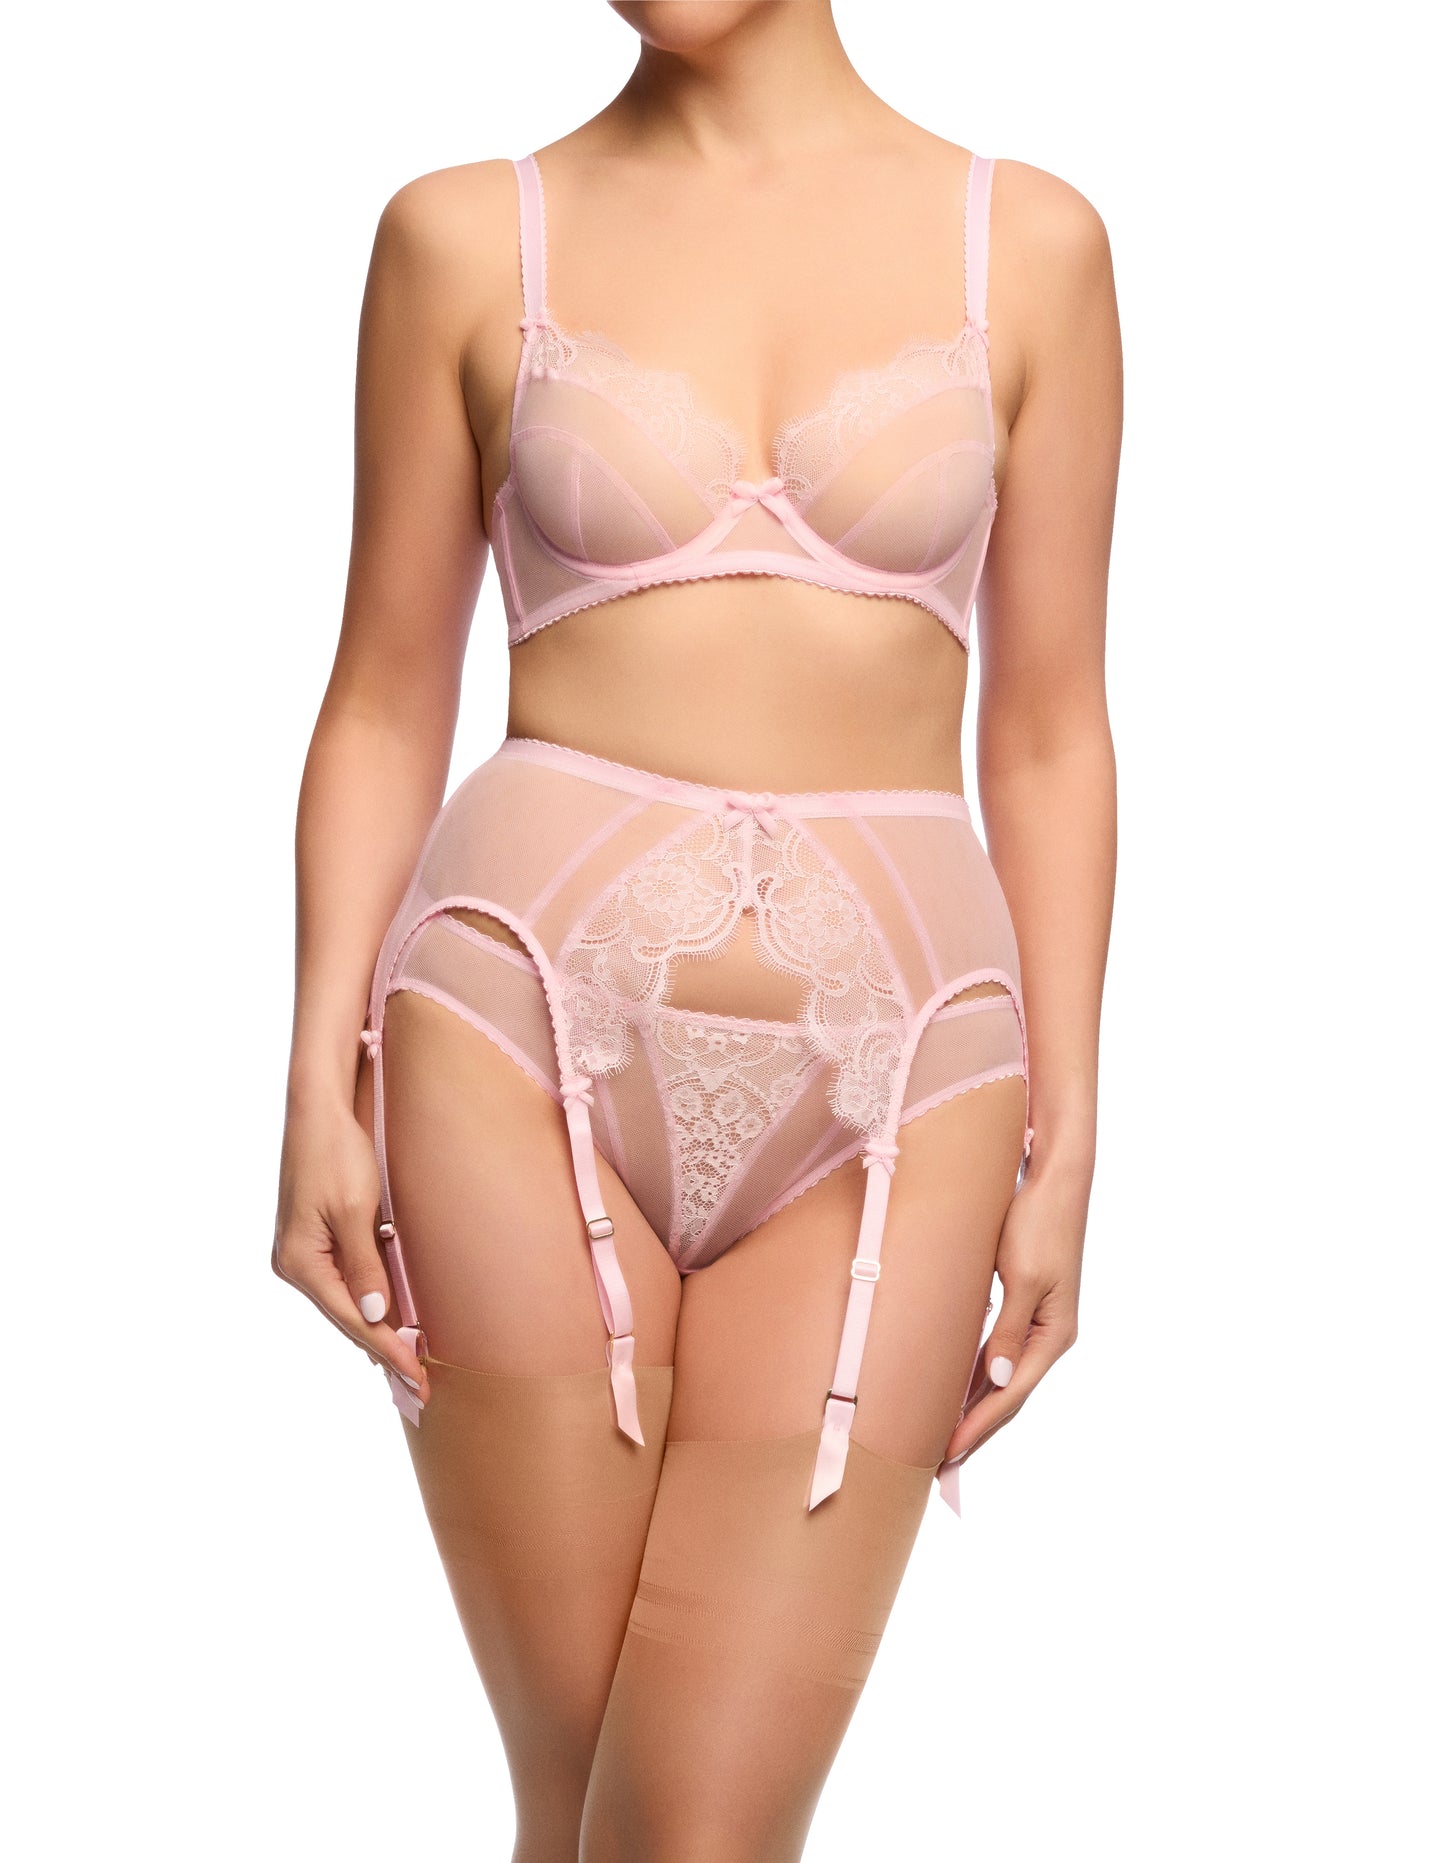 Muse Underwire Bra in Cameo Pink By Dita Von Teese - 32B-38E